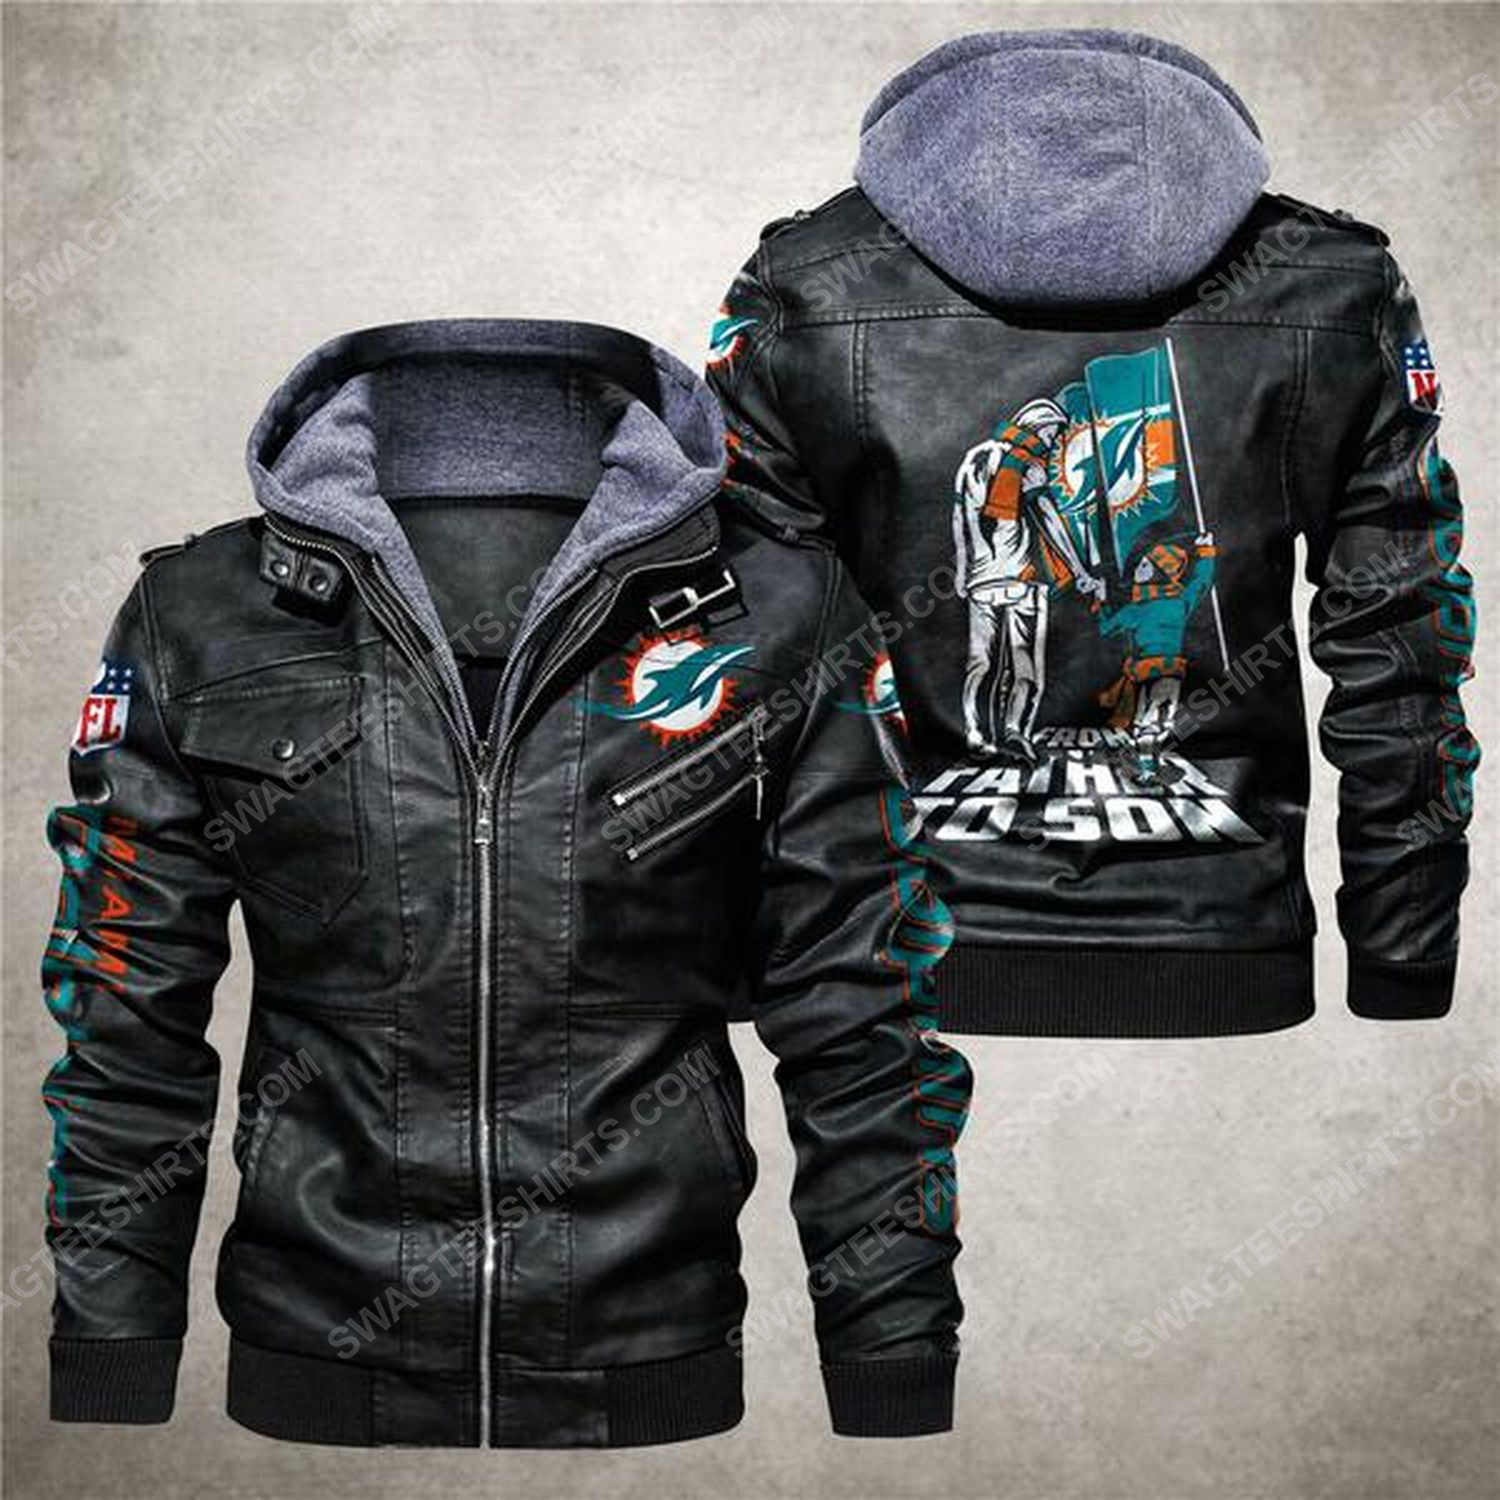 National football league miami dolphins from father to son leather jacket - black